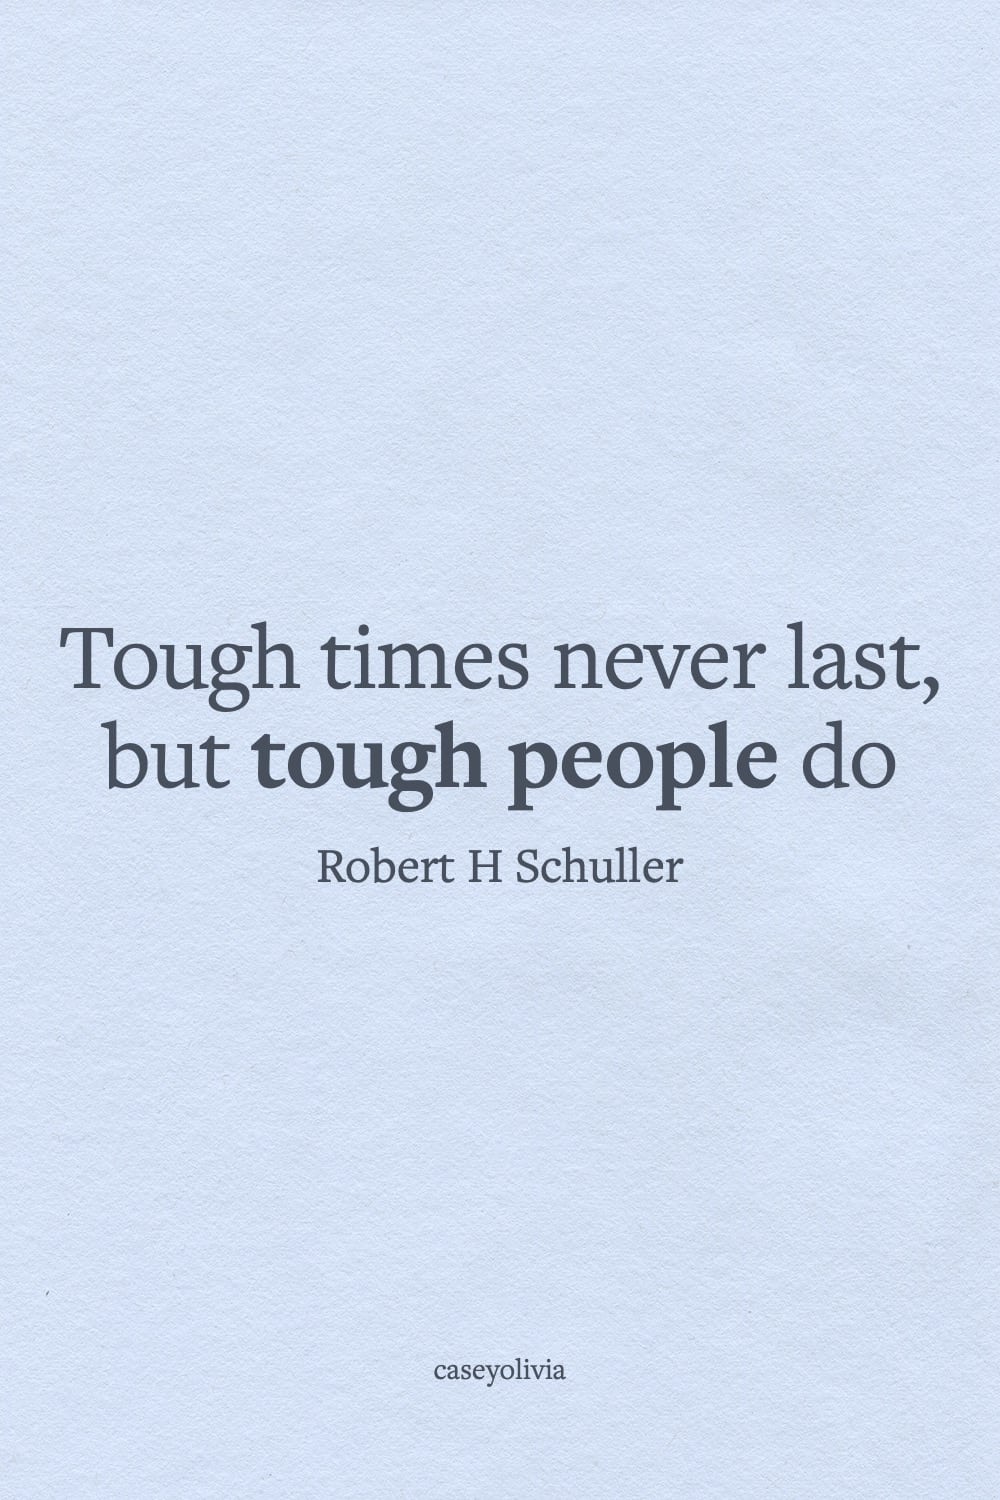 tough times never last quote image from robert schuller